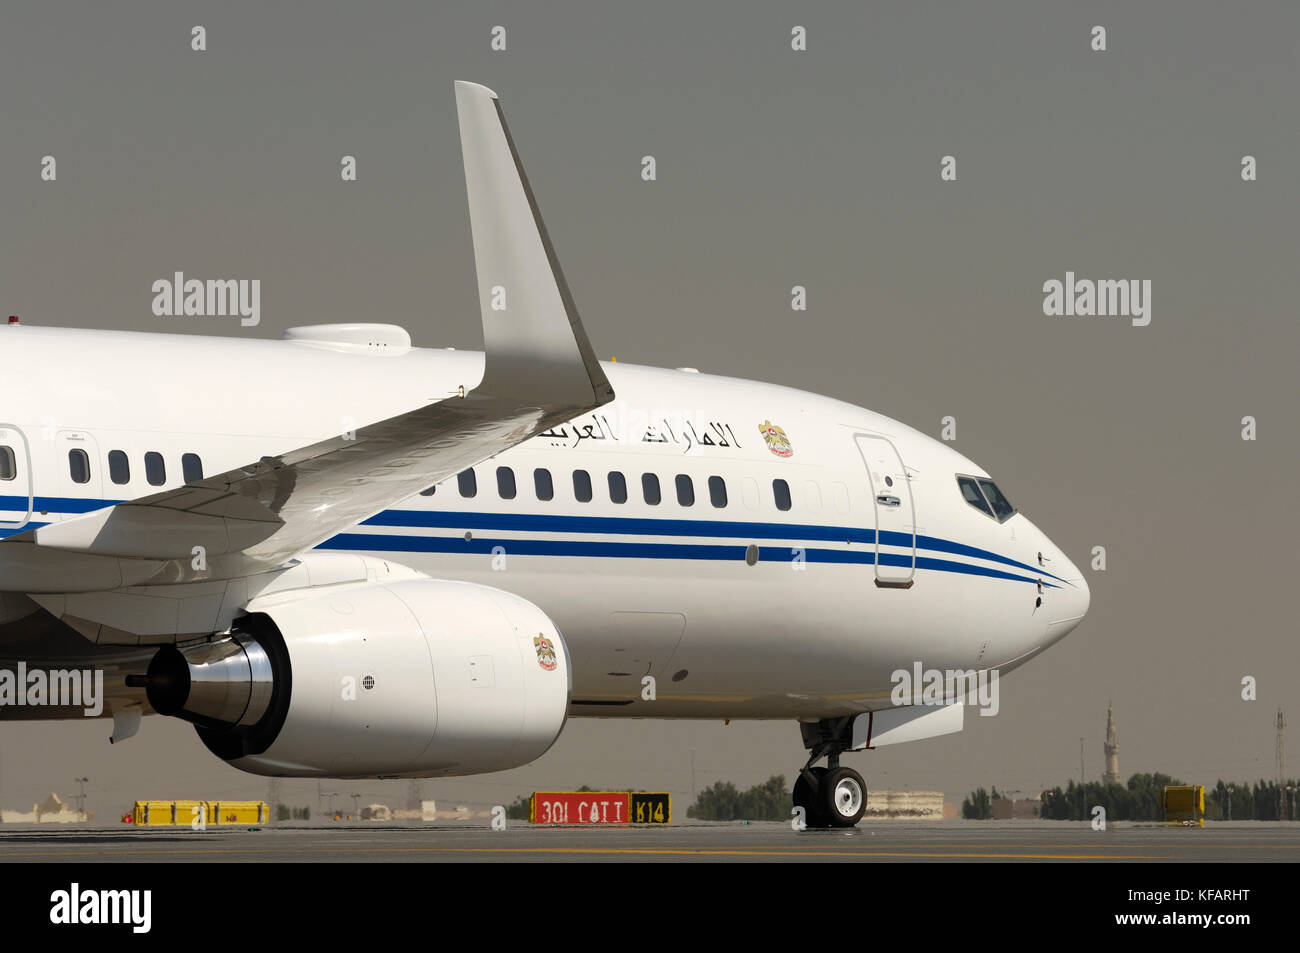 winglwt, engine and forward fuselage of a Dubai Air Wing Boeing 737-800 BBJ2 taxiing Stock Photo